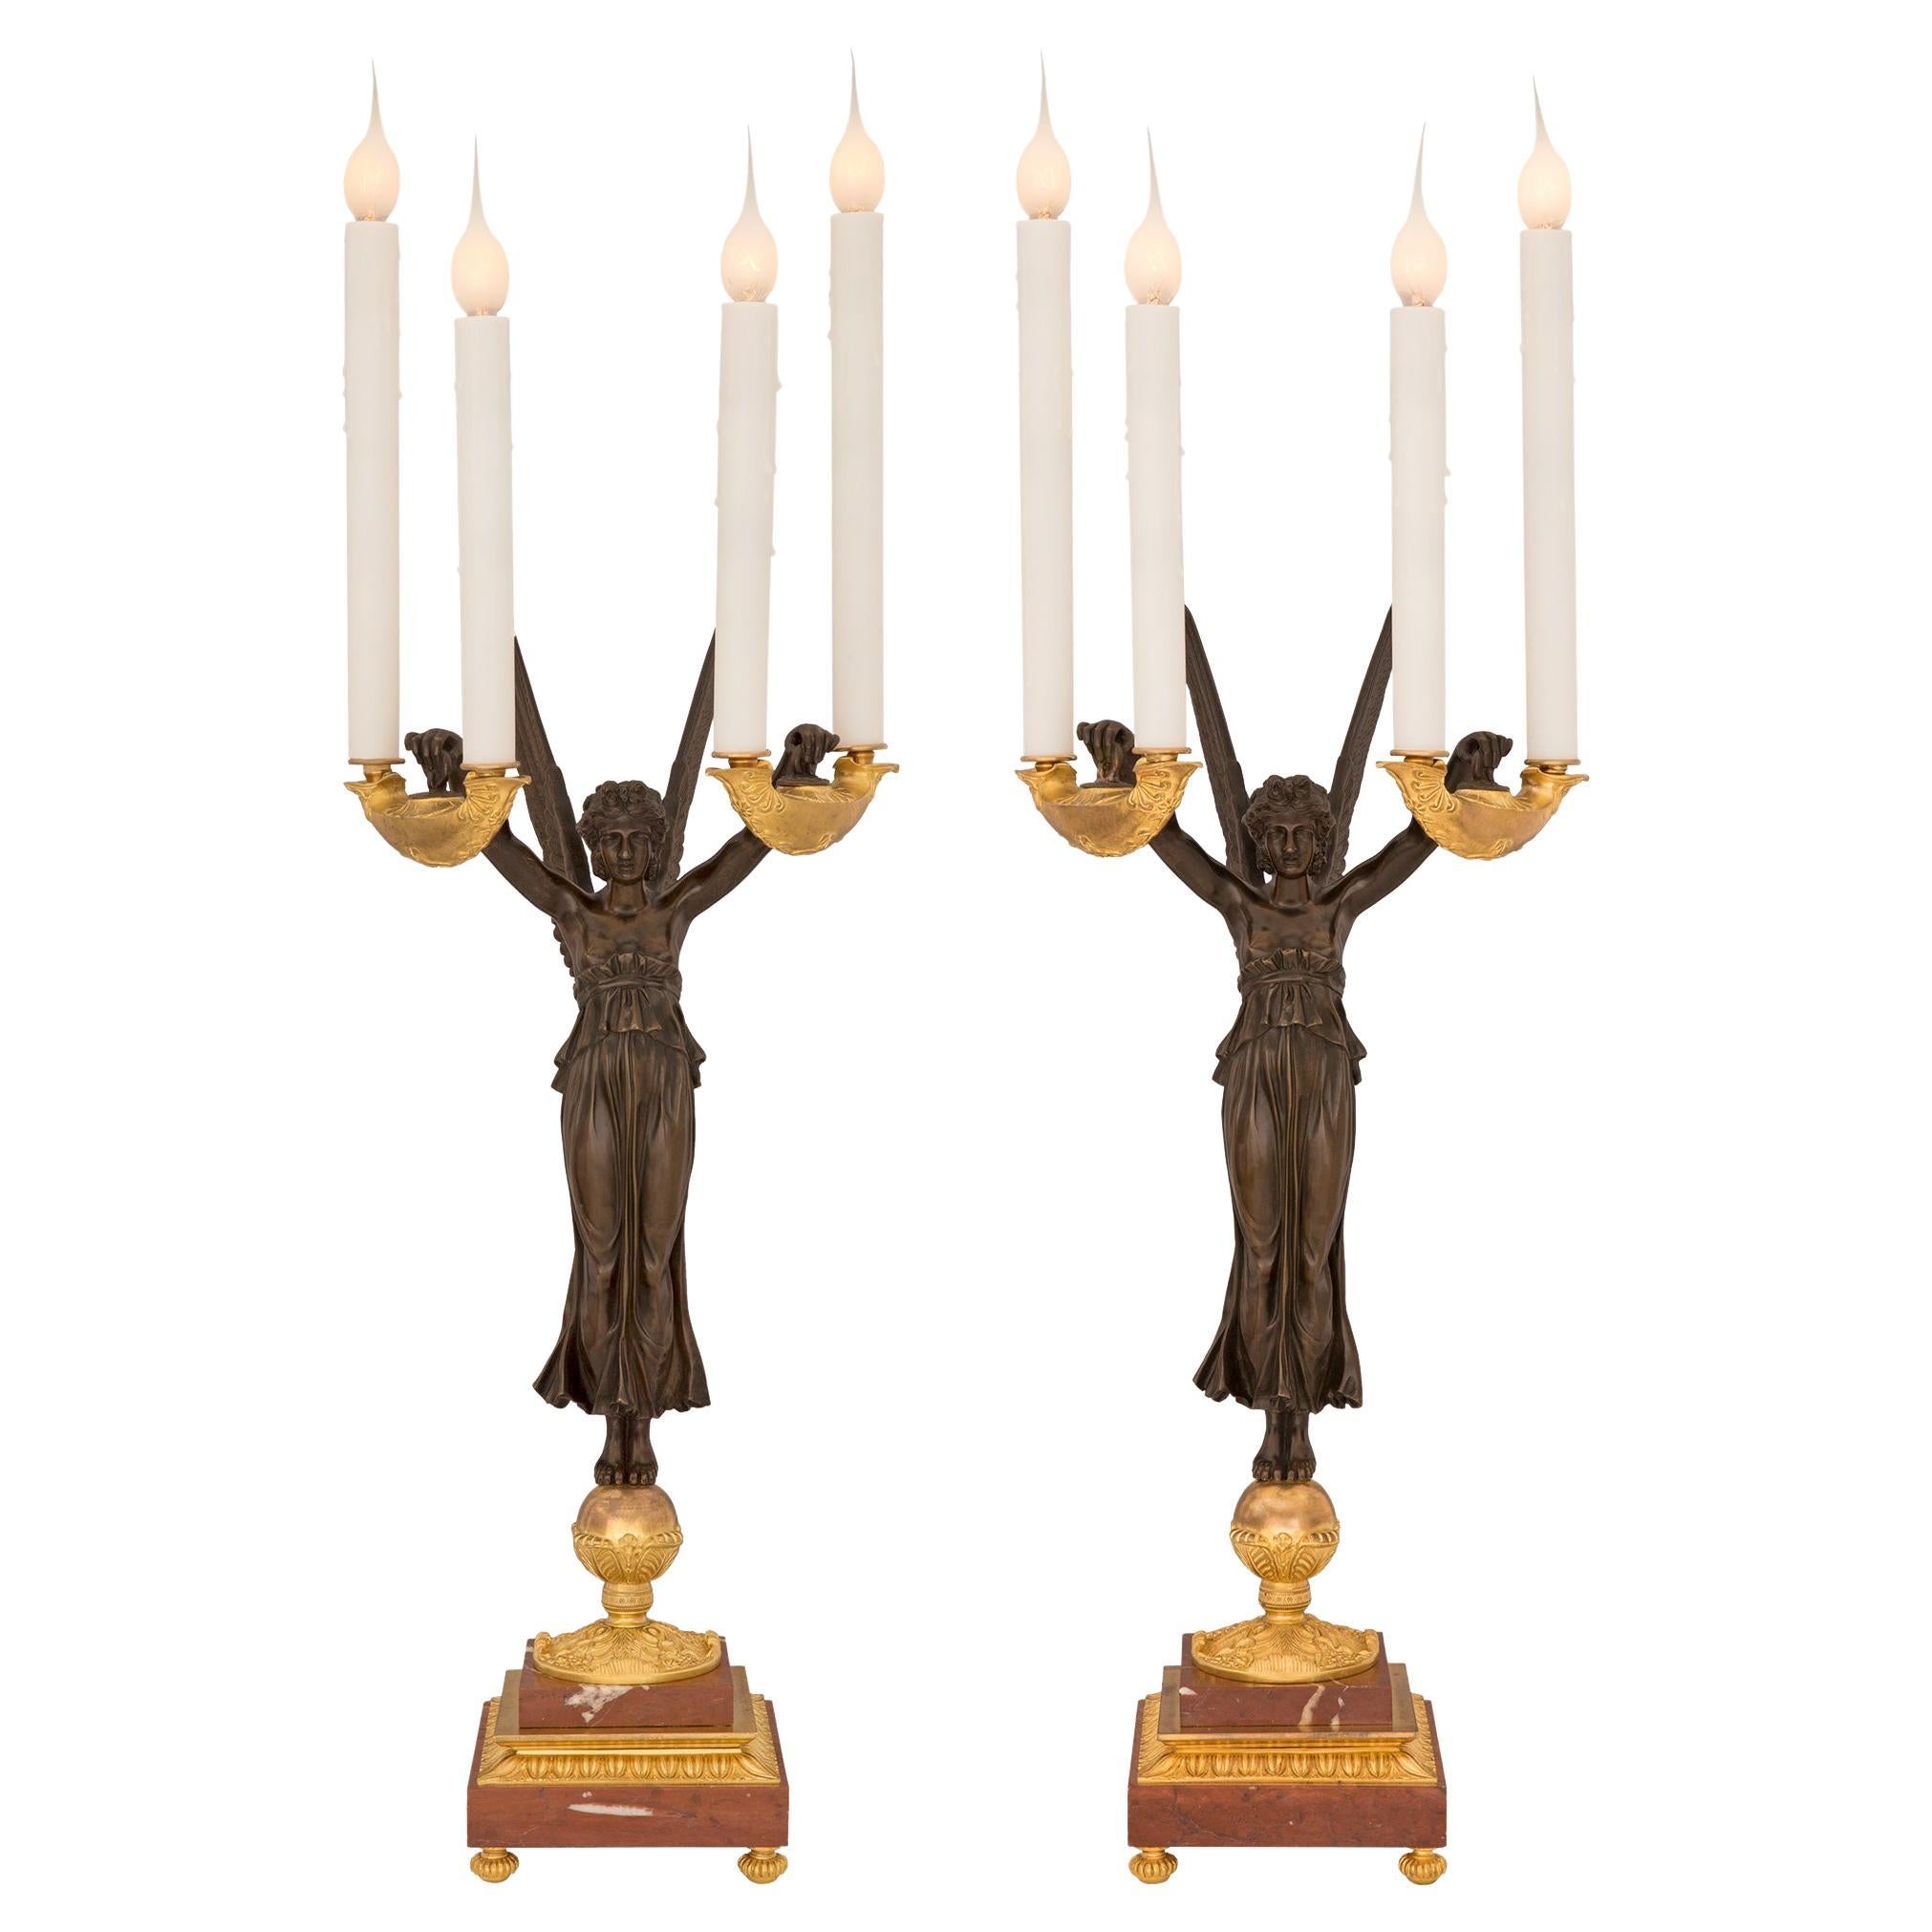 Pair of French 19th Century Neoclassical Style ‘Aux Victoires’ Candelabra Lamps